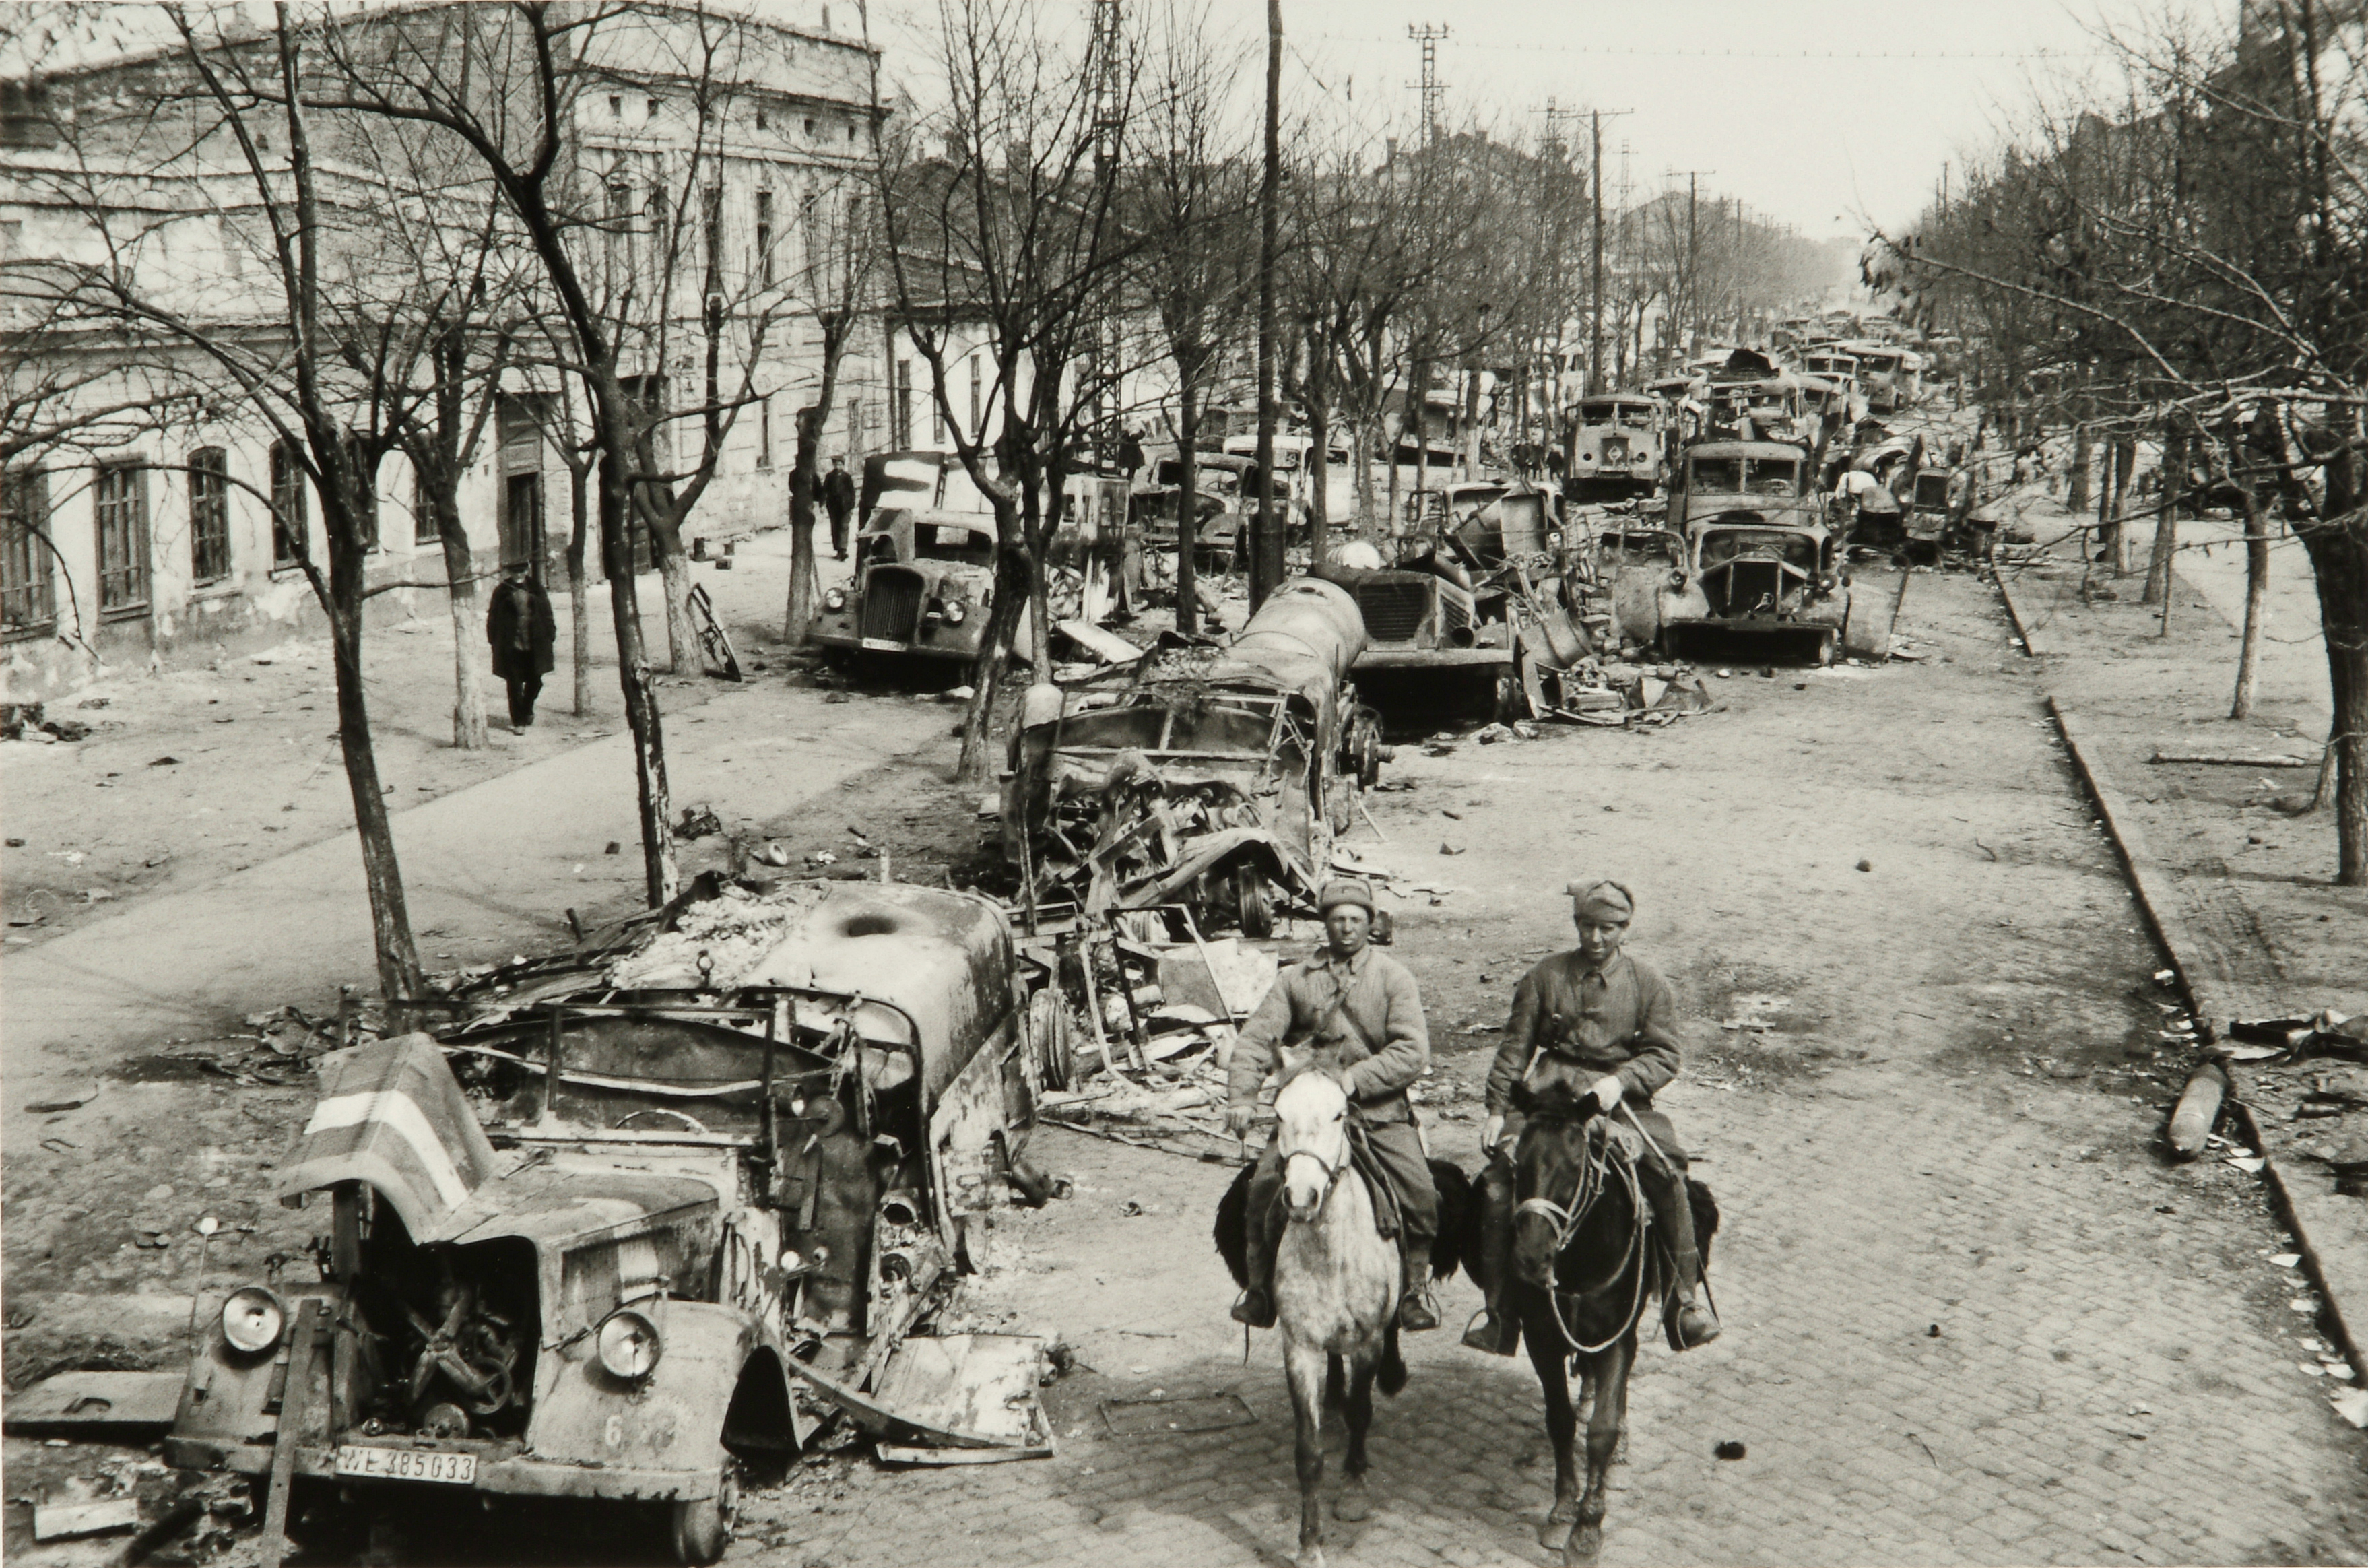 Inspecting the German Losses on the Outskirts of Odessa